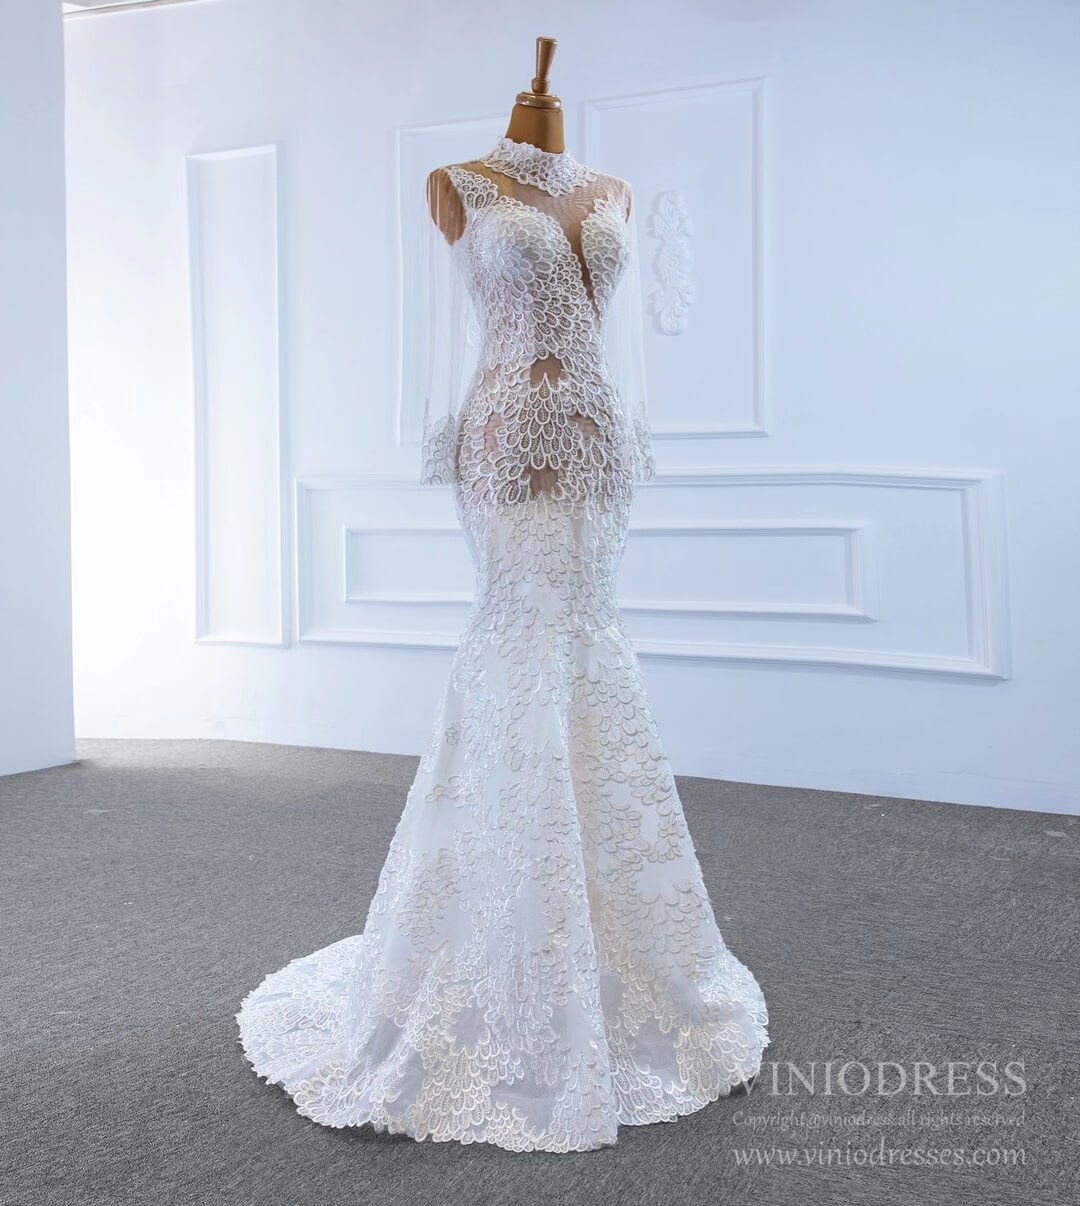 Sexy Sheer Lace Mermaid Wedding Dresses with Sleeves VW1782-wedding dresses-Viniodress-Viniodress